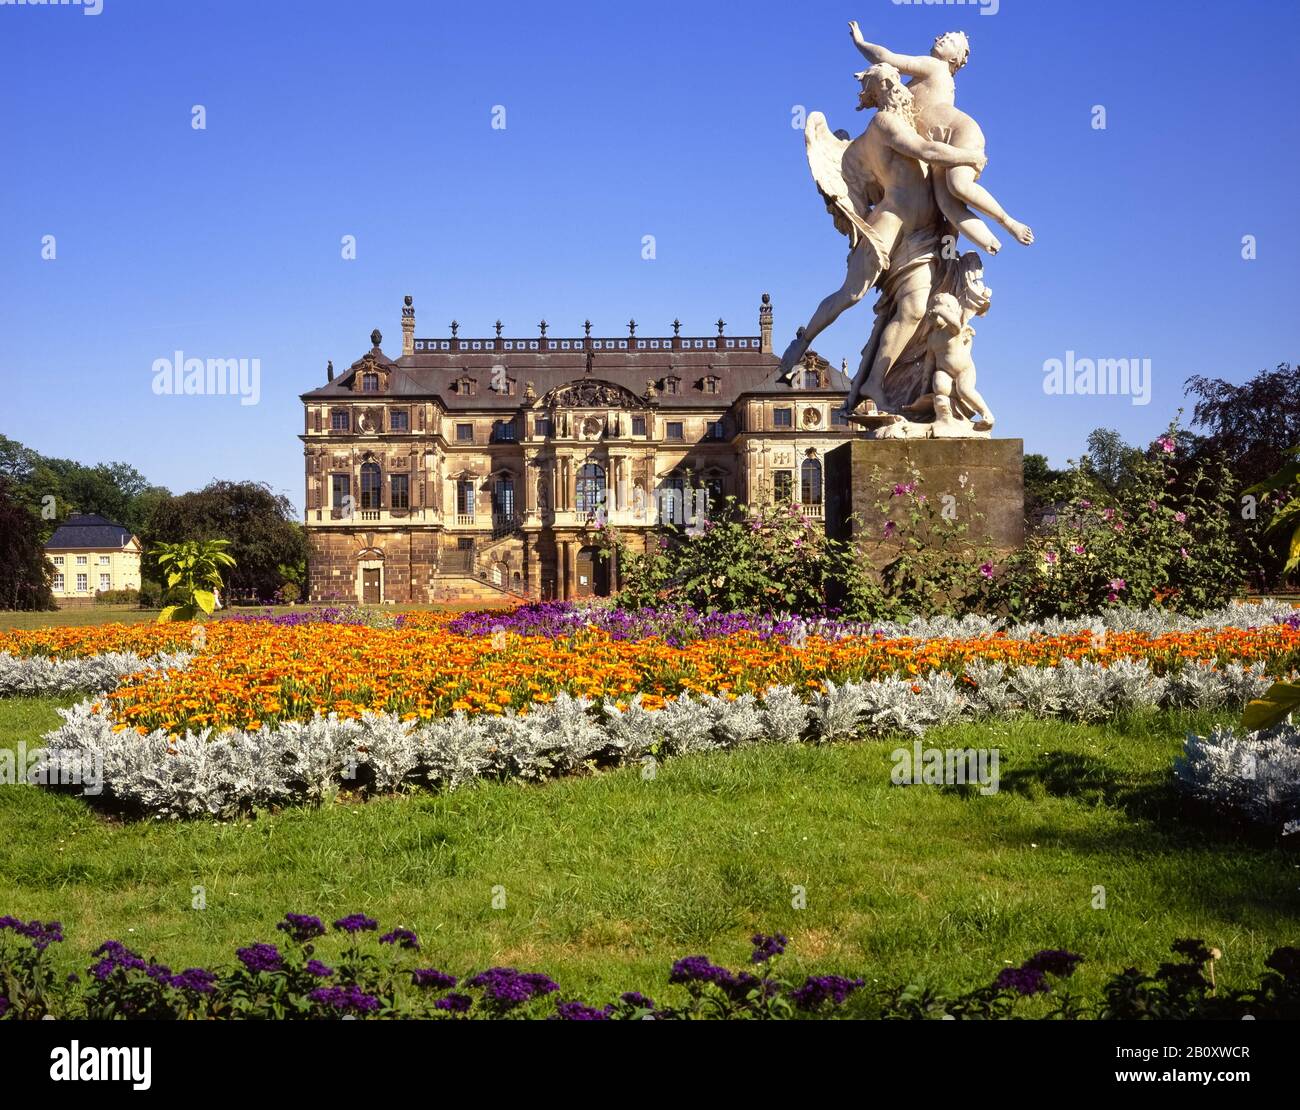 Plastik Die Zeit kidnaps the beauty in the flower circle in front of the palace in the Great Garden in Dresden, Saxony, Germany, Stock Photo